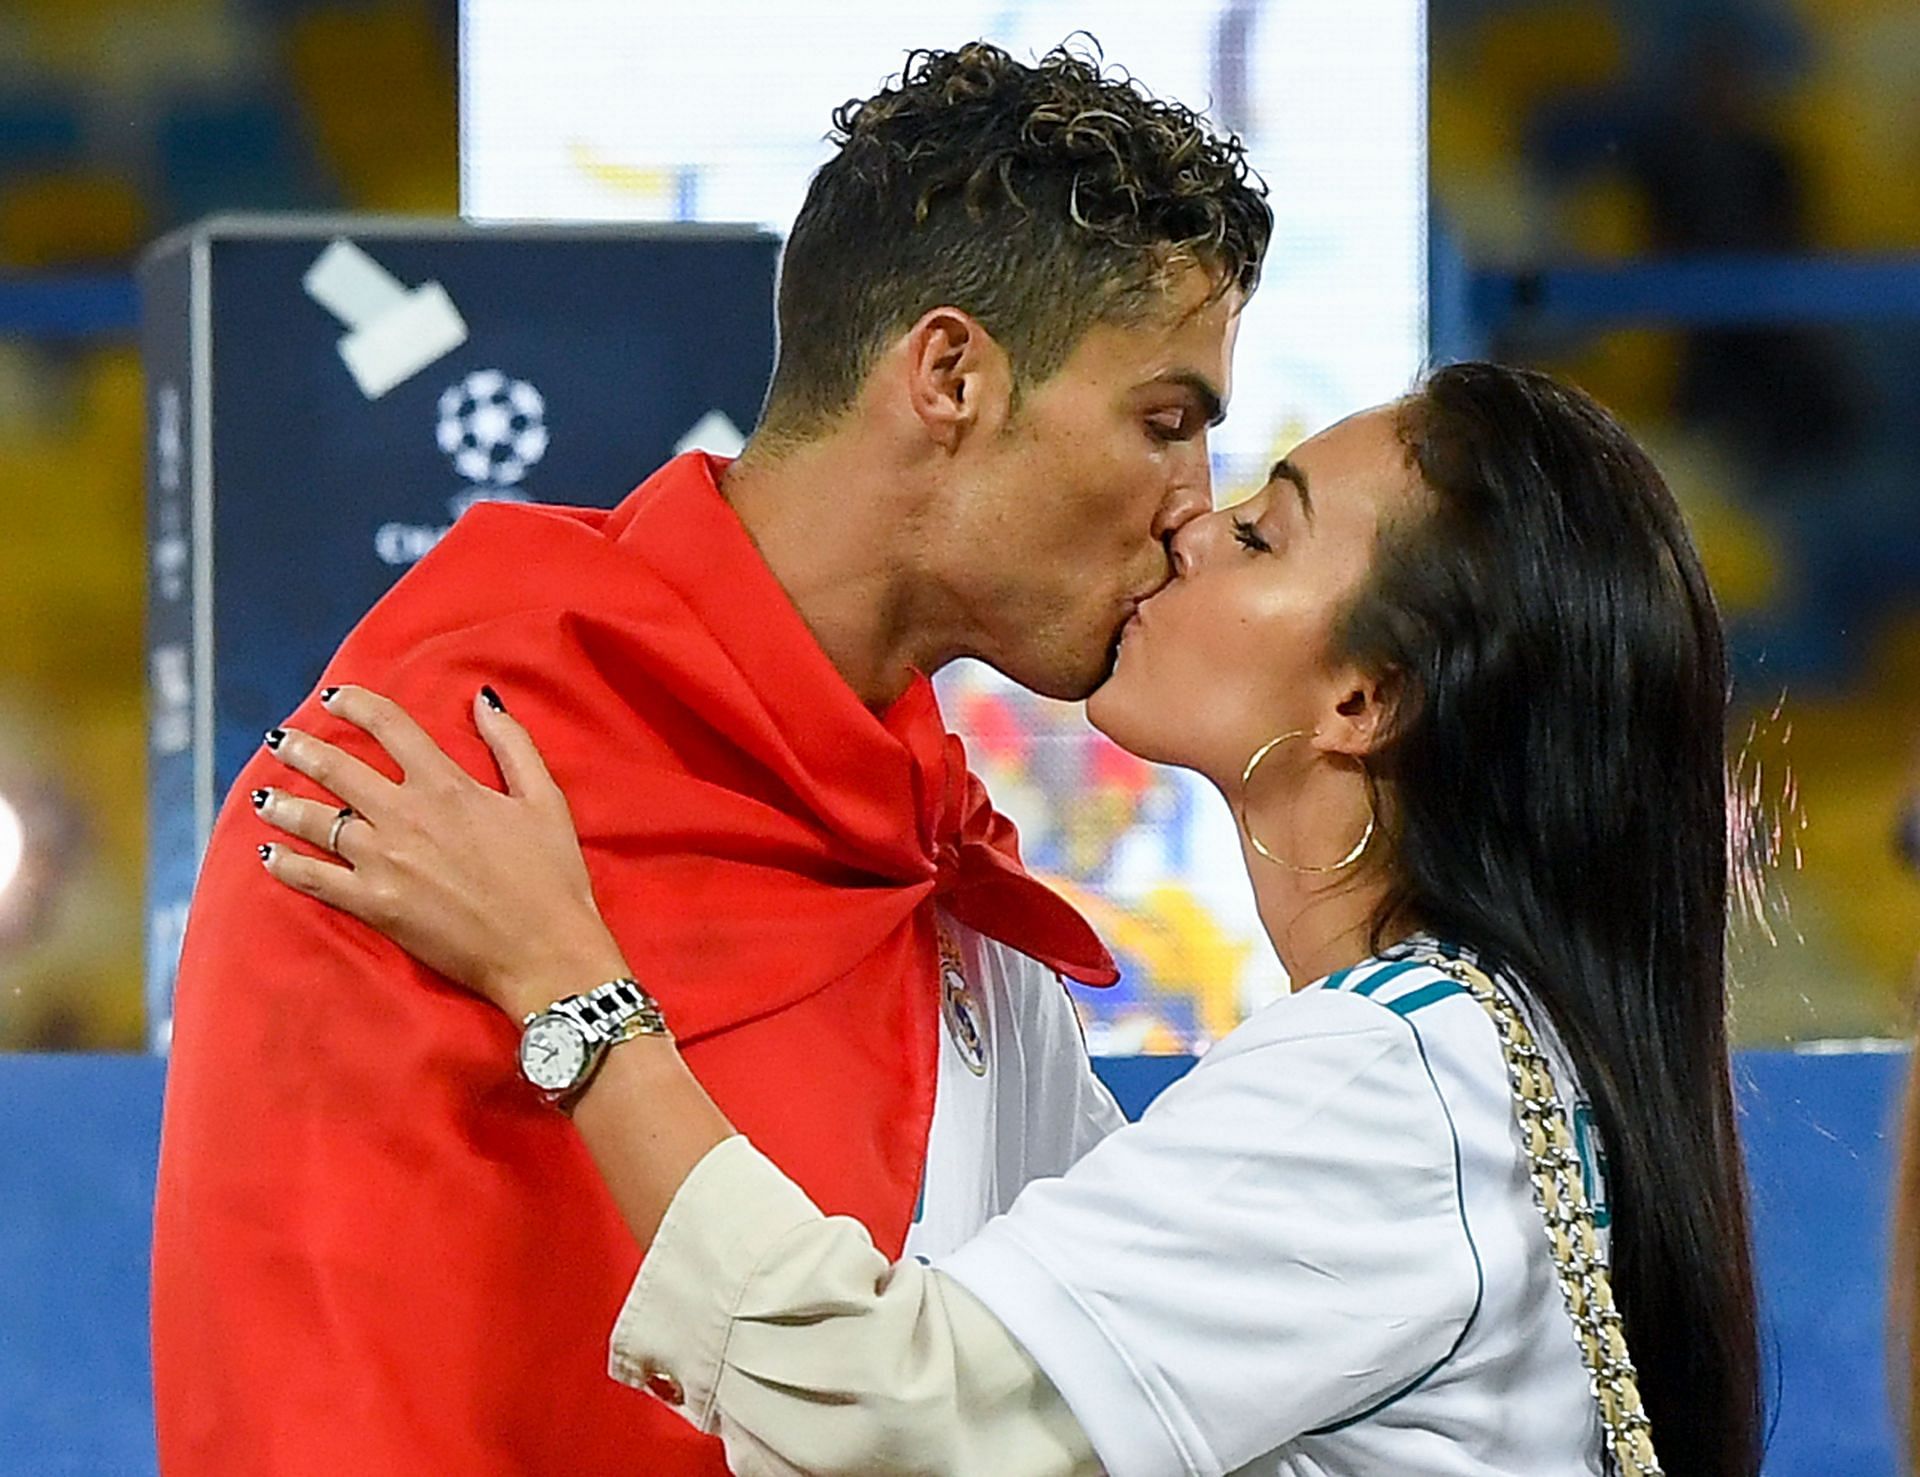 The Manchester United star with his partner Georgina Rodriguez